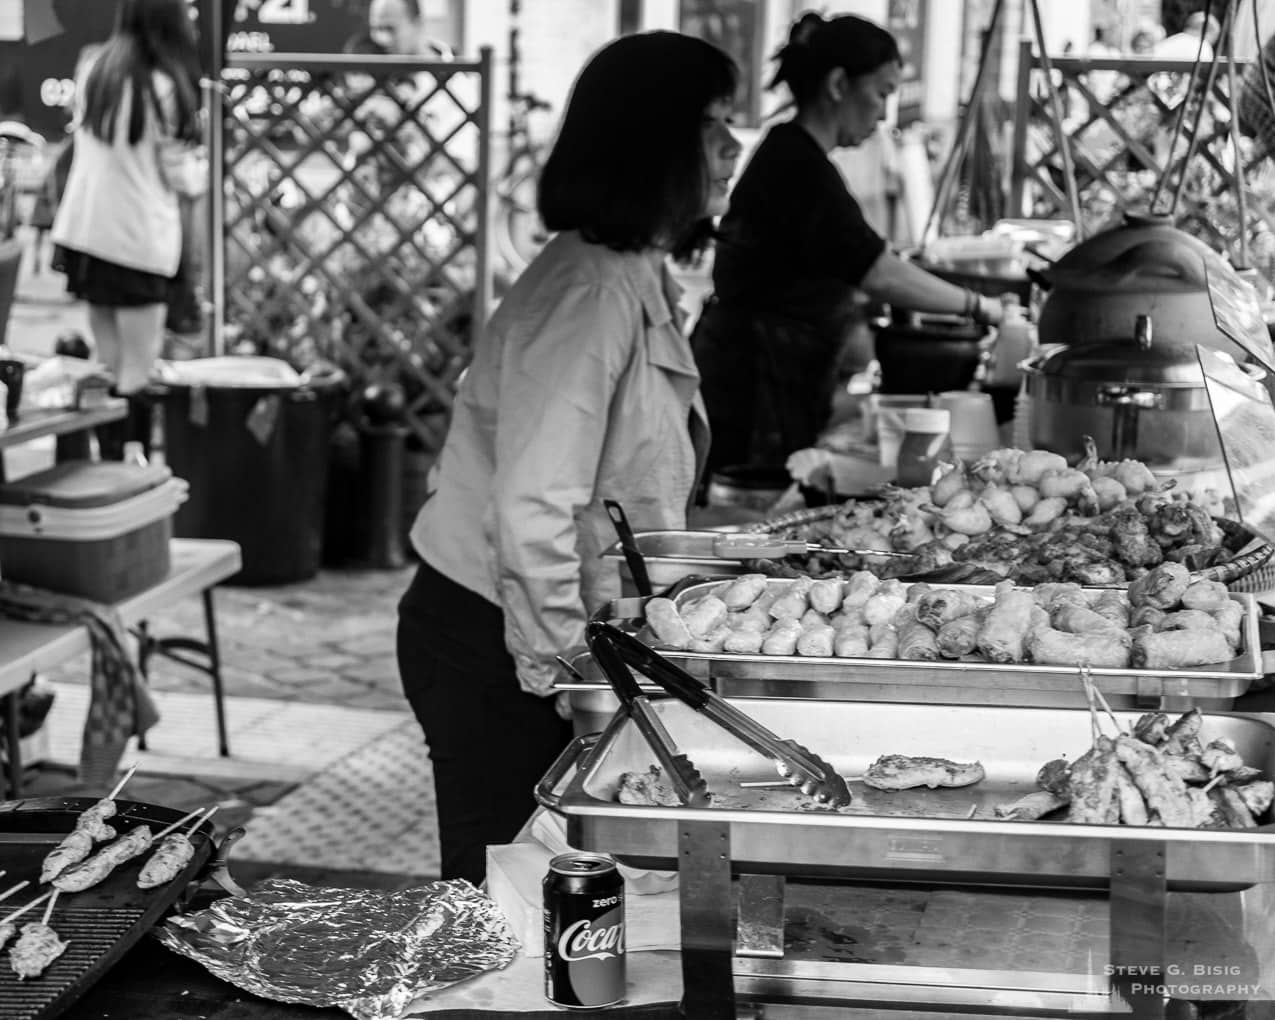 Photo 22/32 of a series of black and white photographs from the 2018 Grande Braderie D'Ixelles sidewalk sale and street festival in Brussels, Belgium.